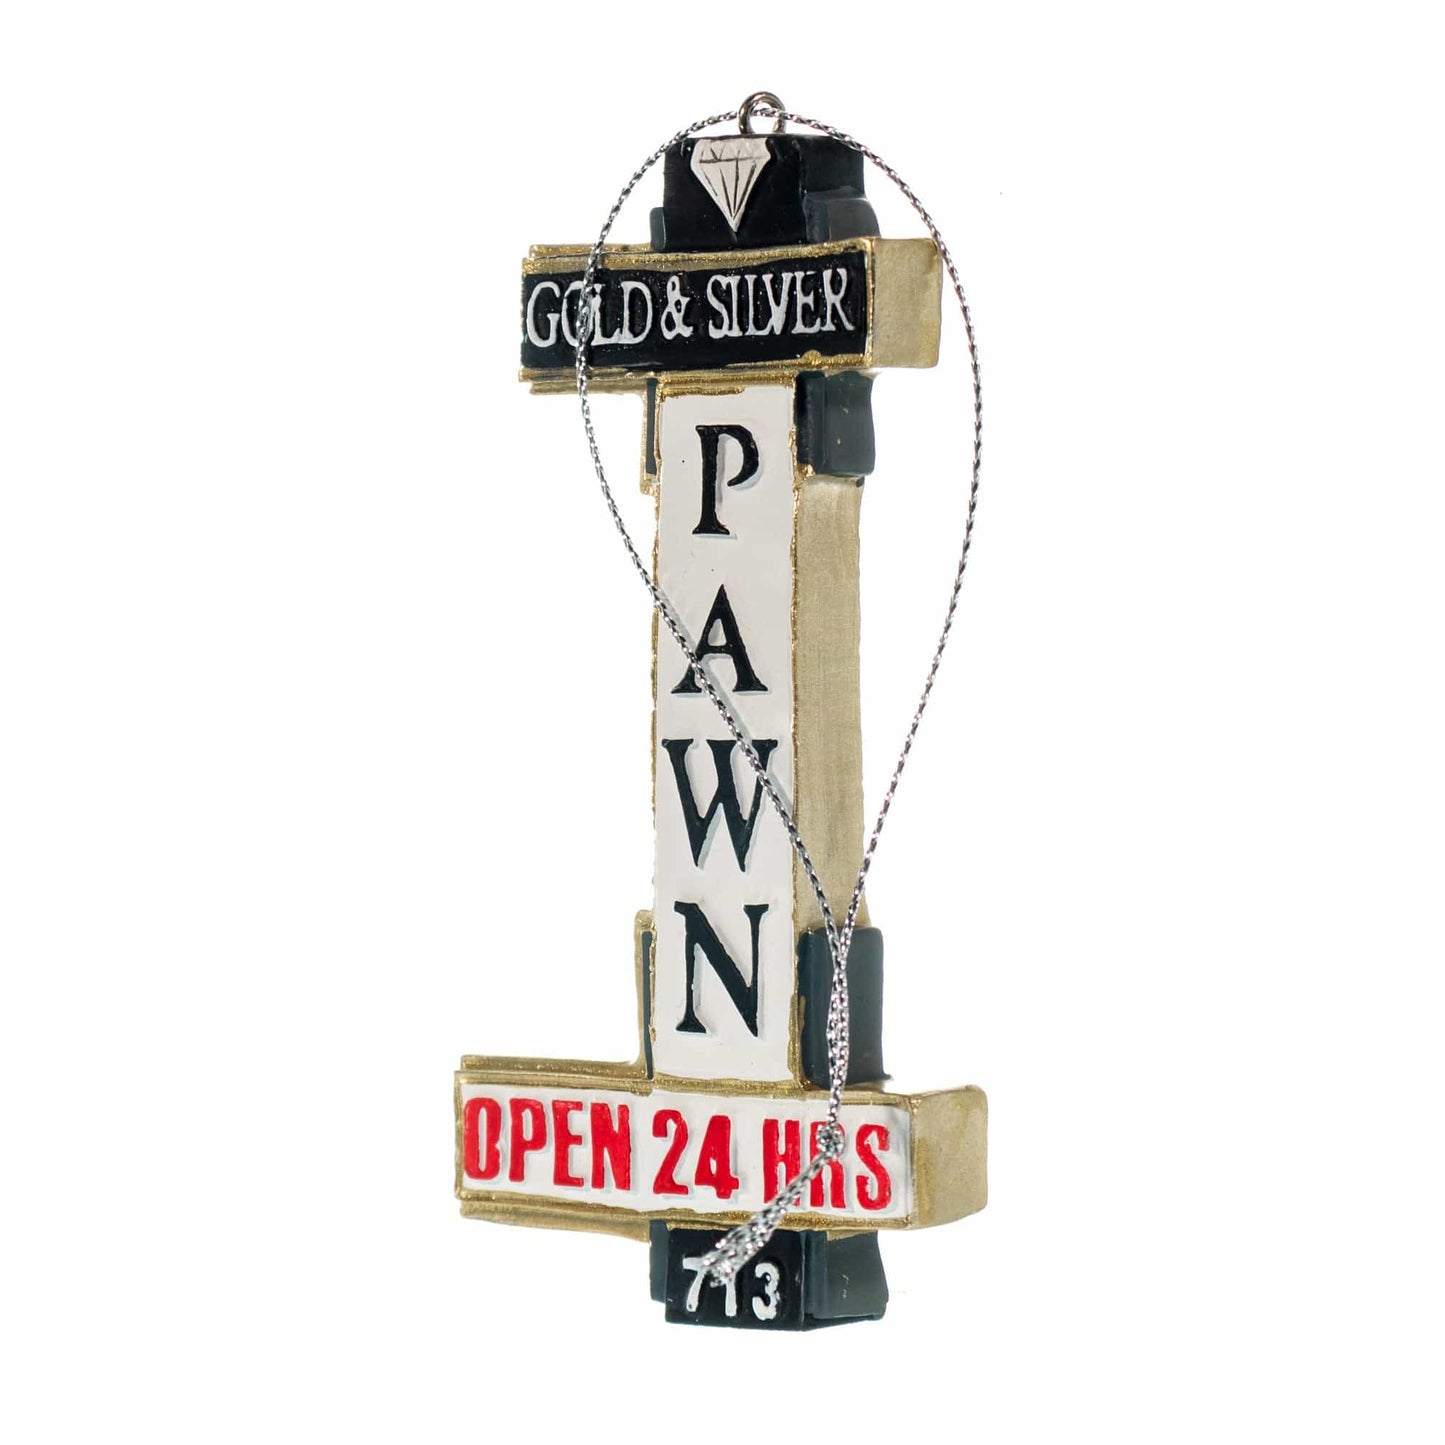 Gold & Silver Pawn Shop Sign Ornament ZOOM